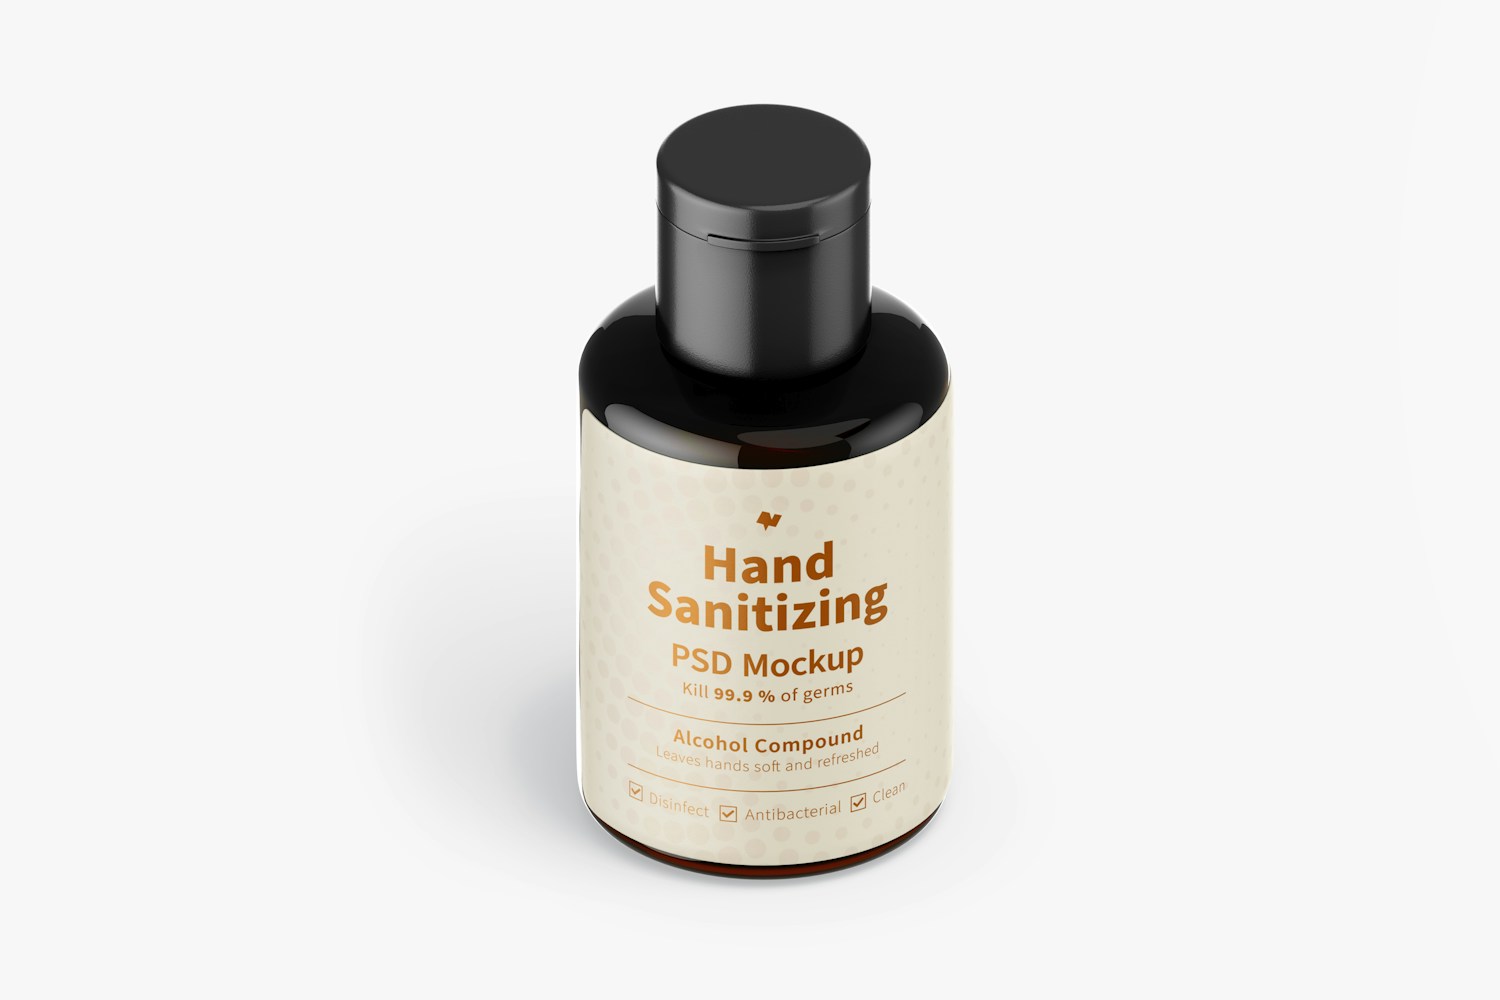 Portable Hand Sanitizing Gel with Label Mockup, Isometric View